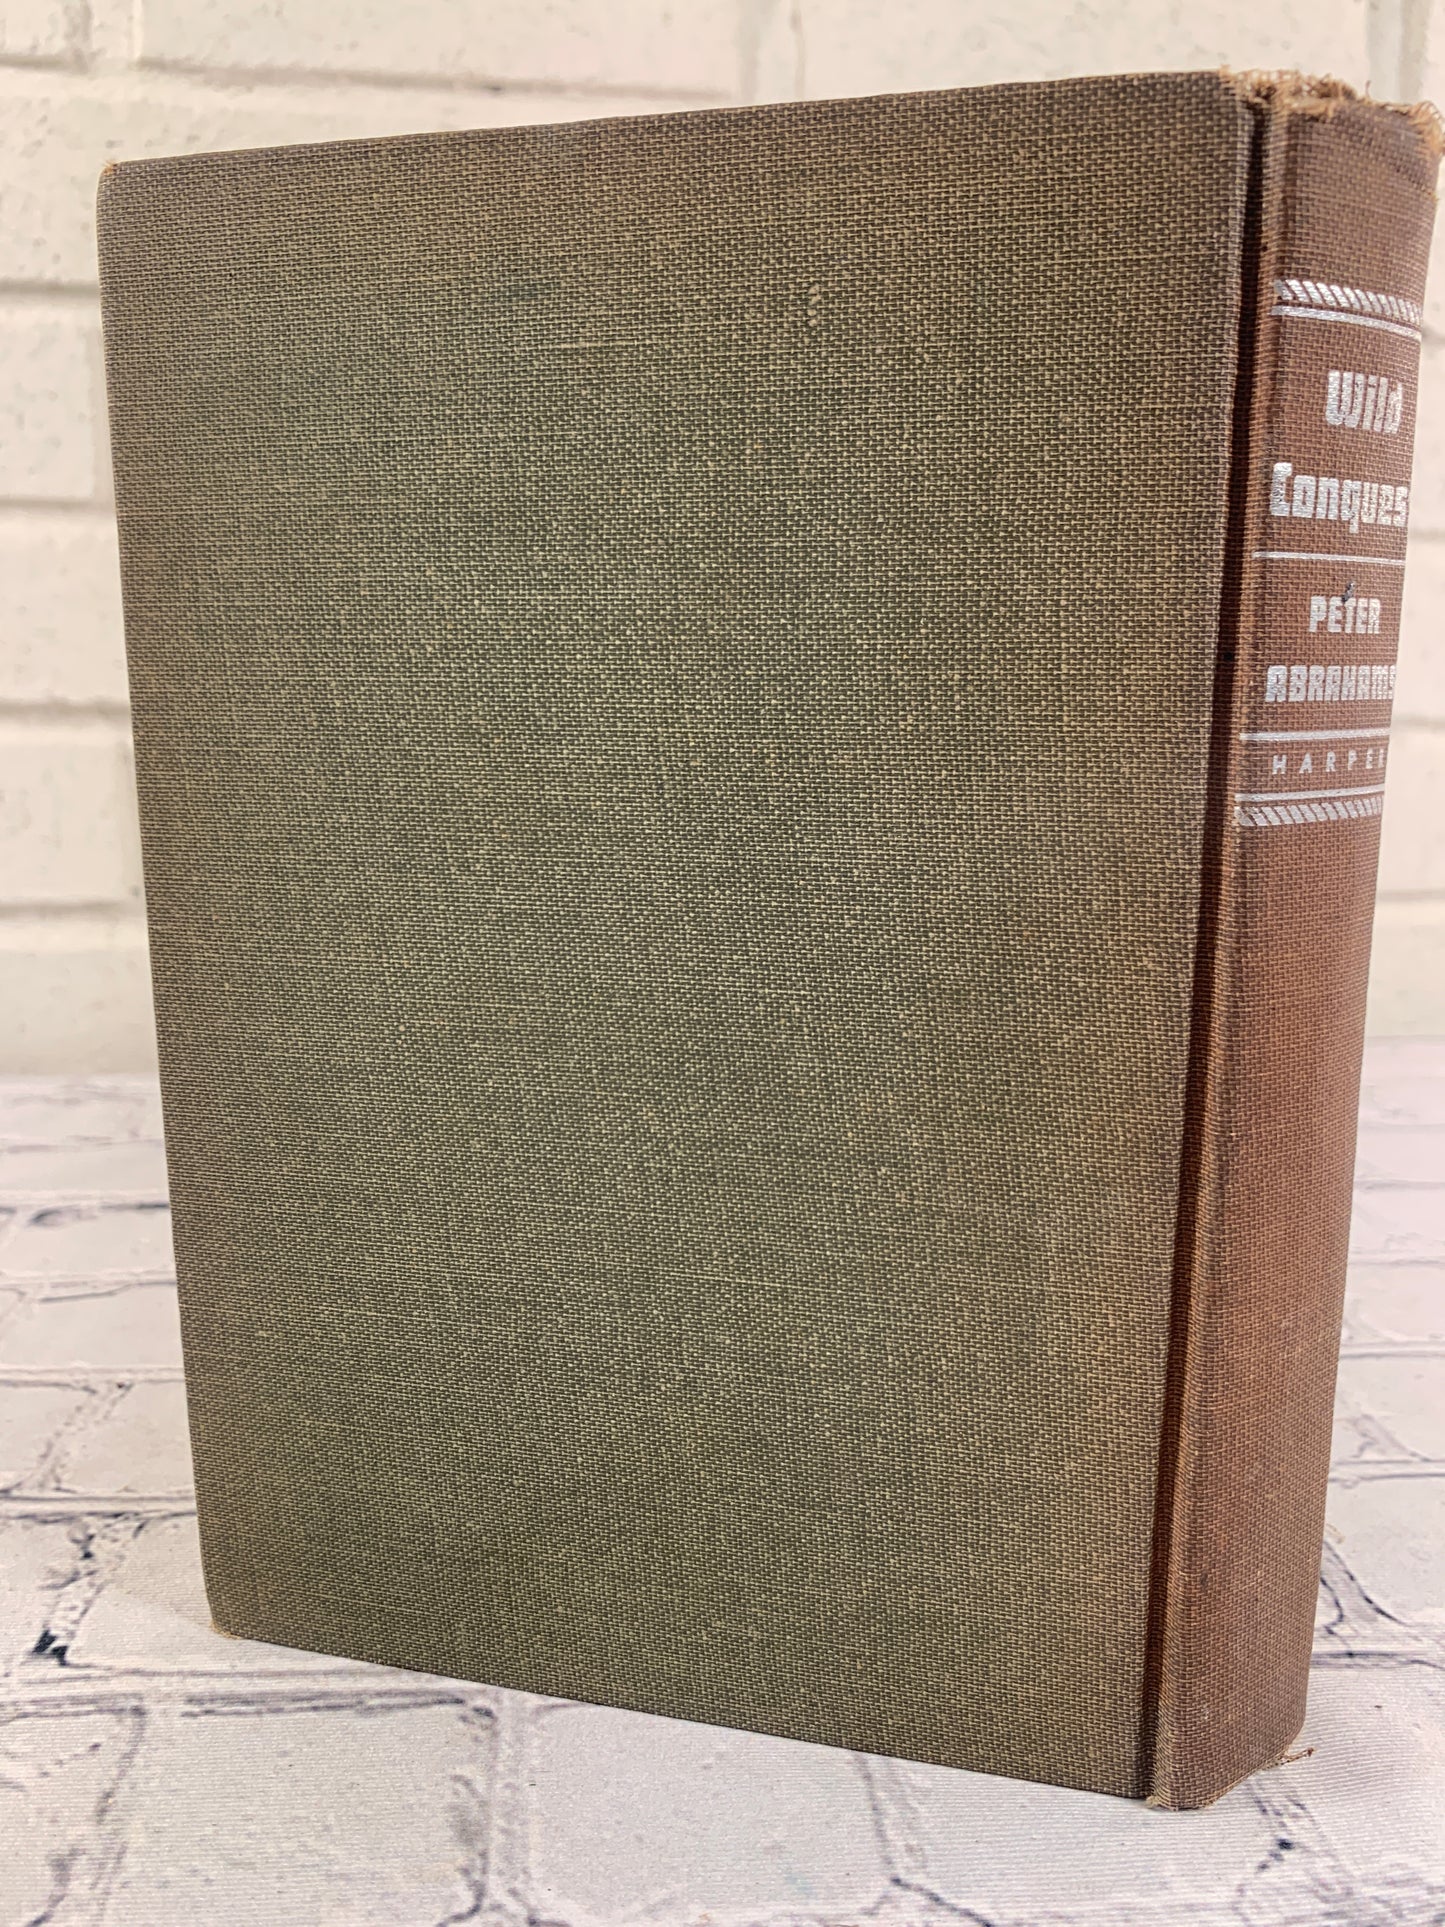 Wild Conquest by Peter Abrahams [1st Edition · 1950]